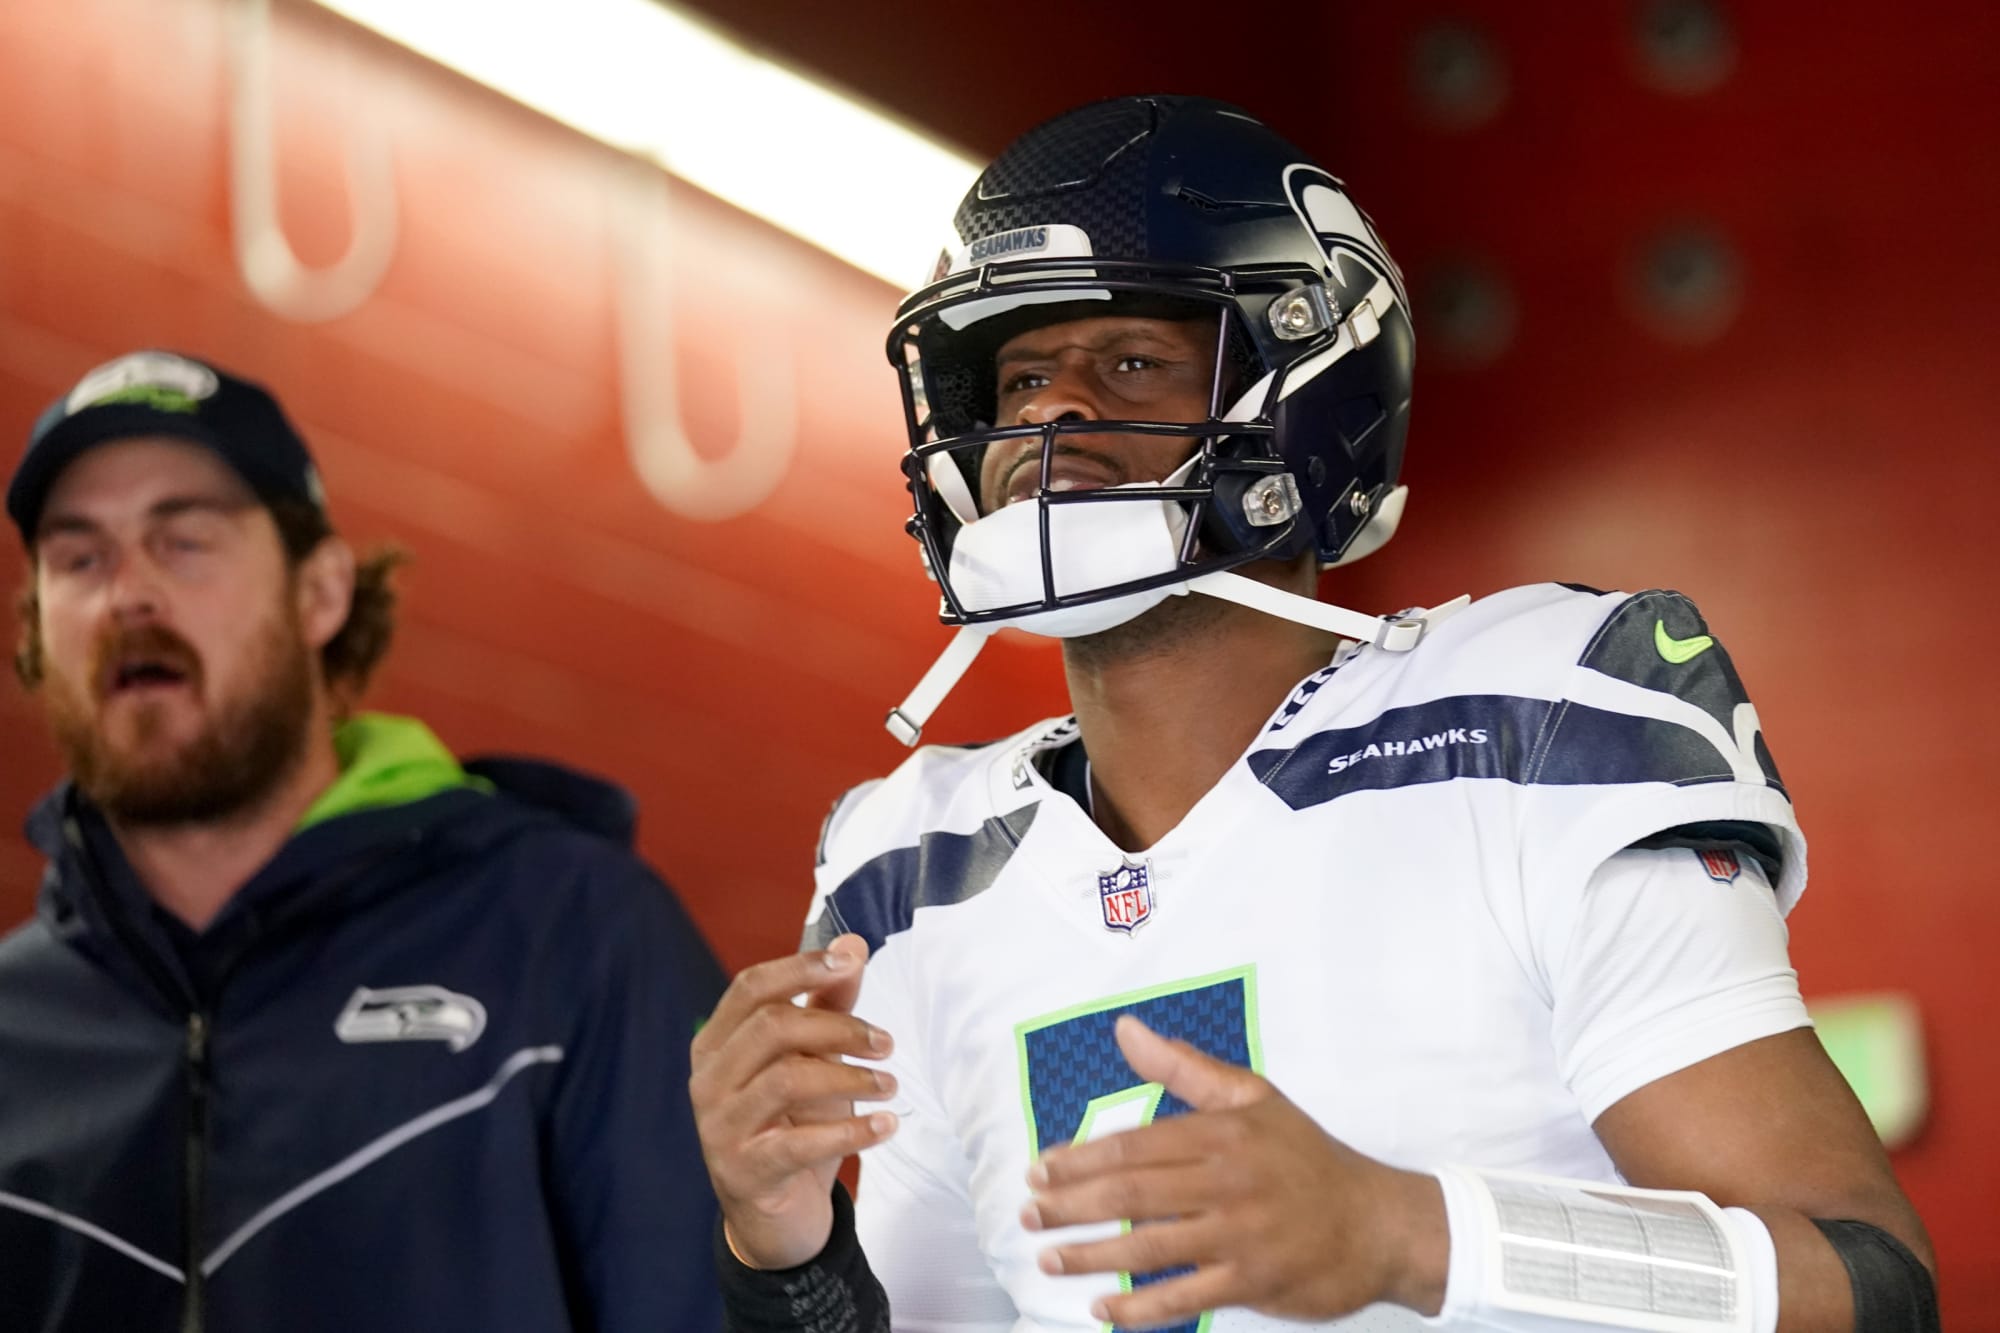 Geno Smith looks likely to return but Seahawks could lose other big names